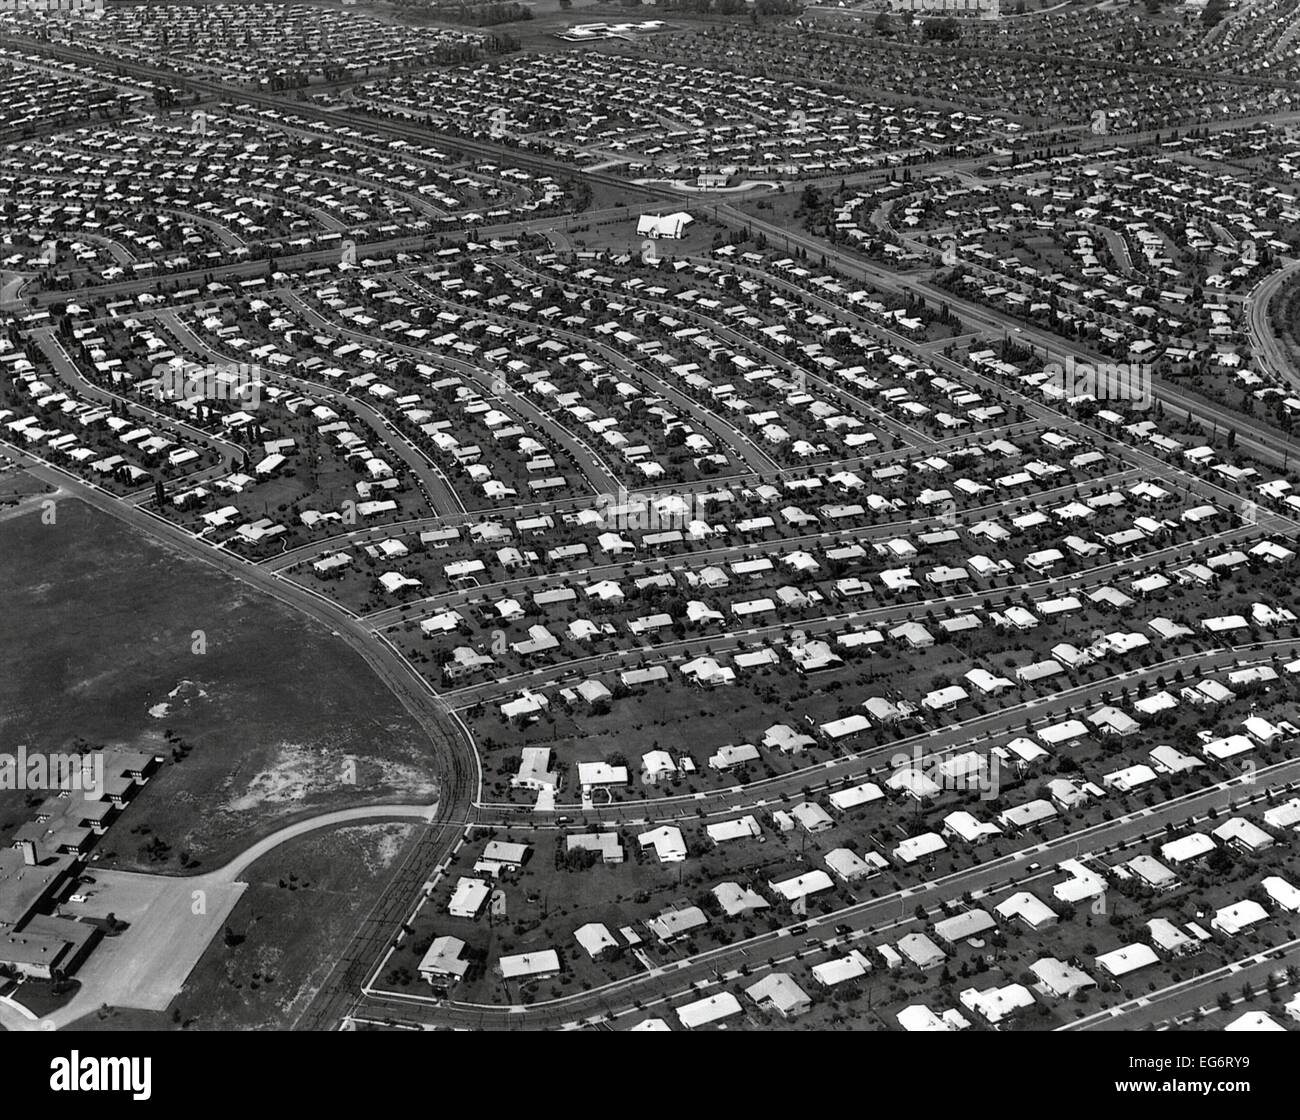 An Aerial view of the Levittown housing project in Pennsylvania. It was located in the eastern part of the State, in the Stock Photo